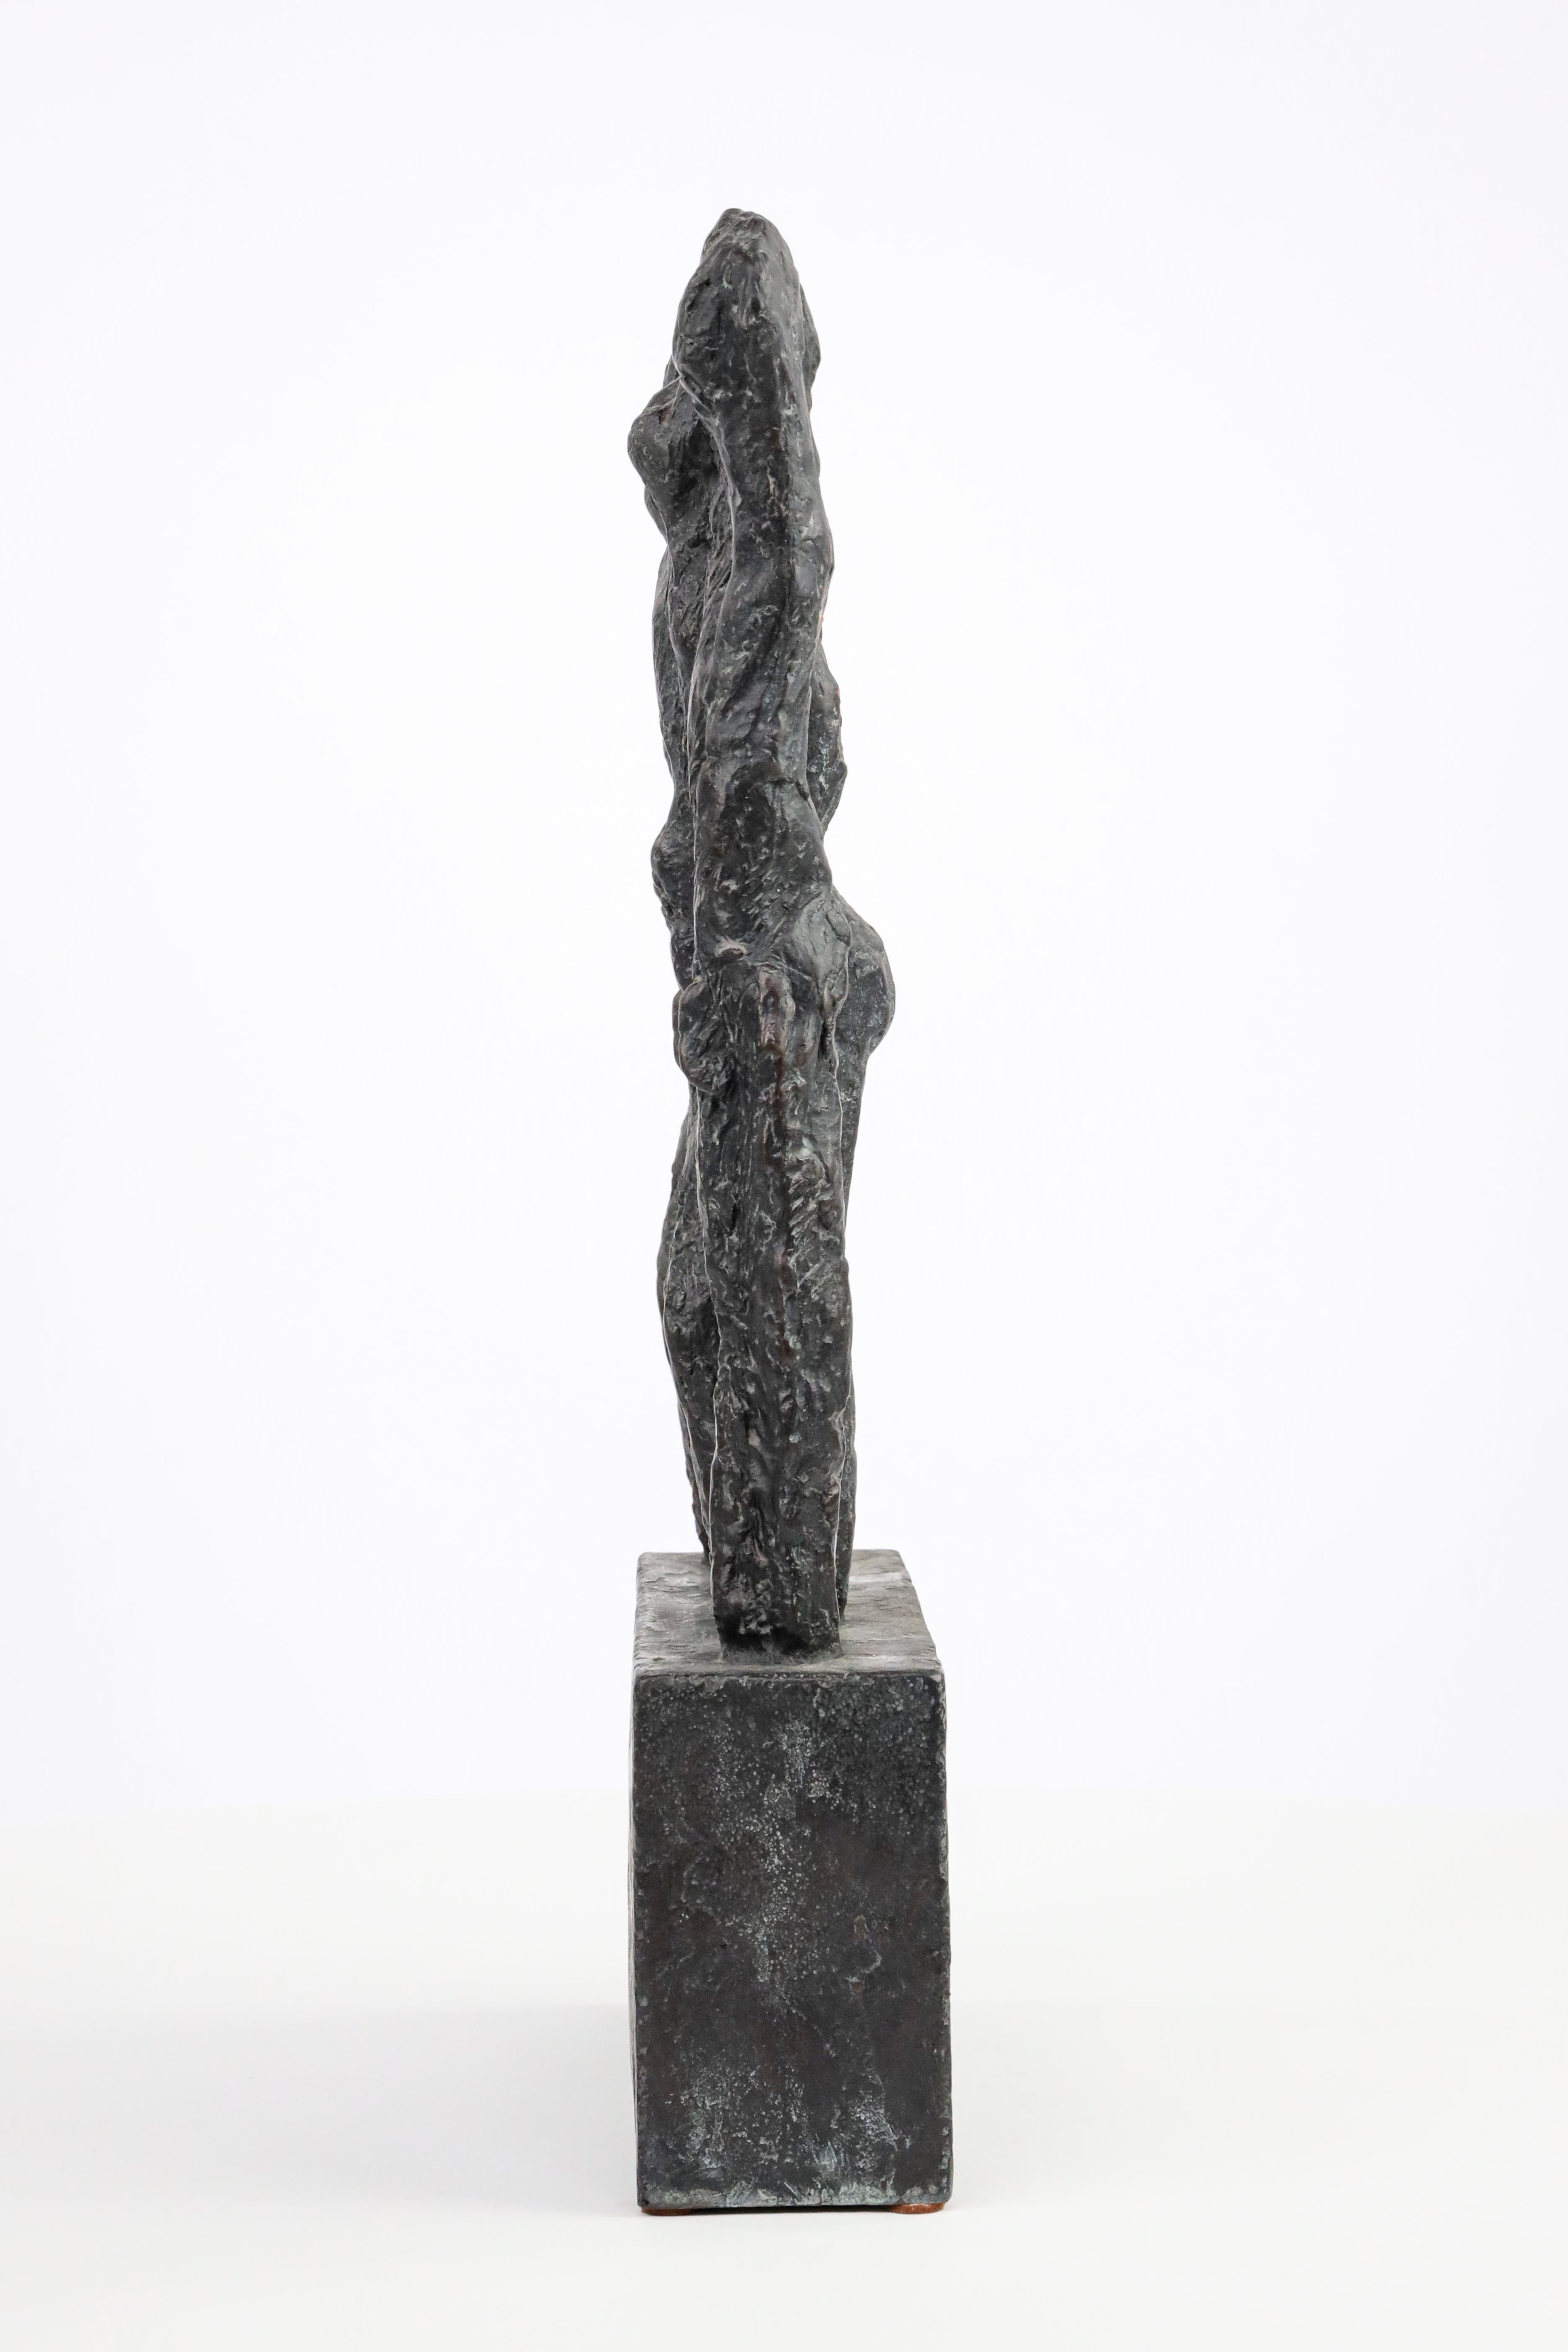 In Line by M. Demal - Bronze sculpture, group of female figures, semi-abstract For Sale 2